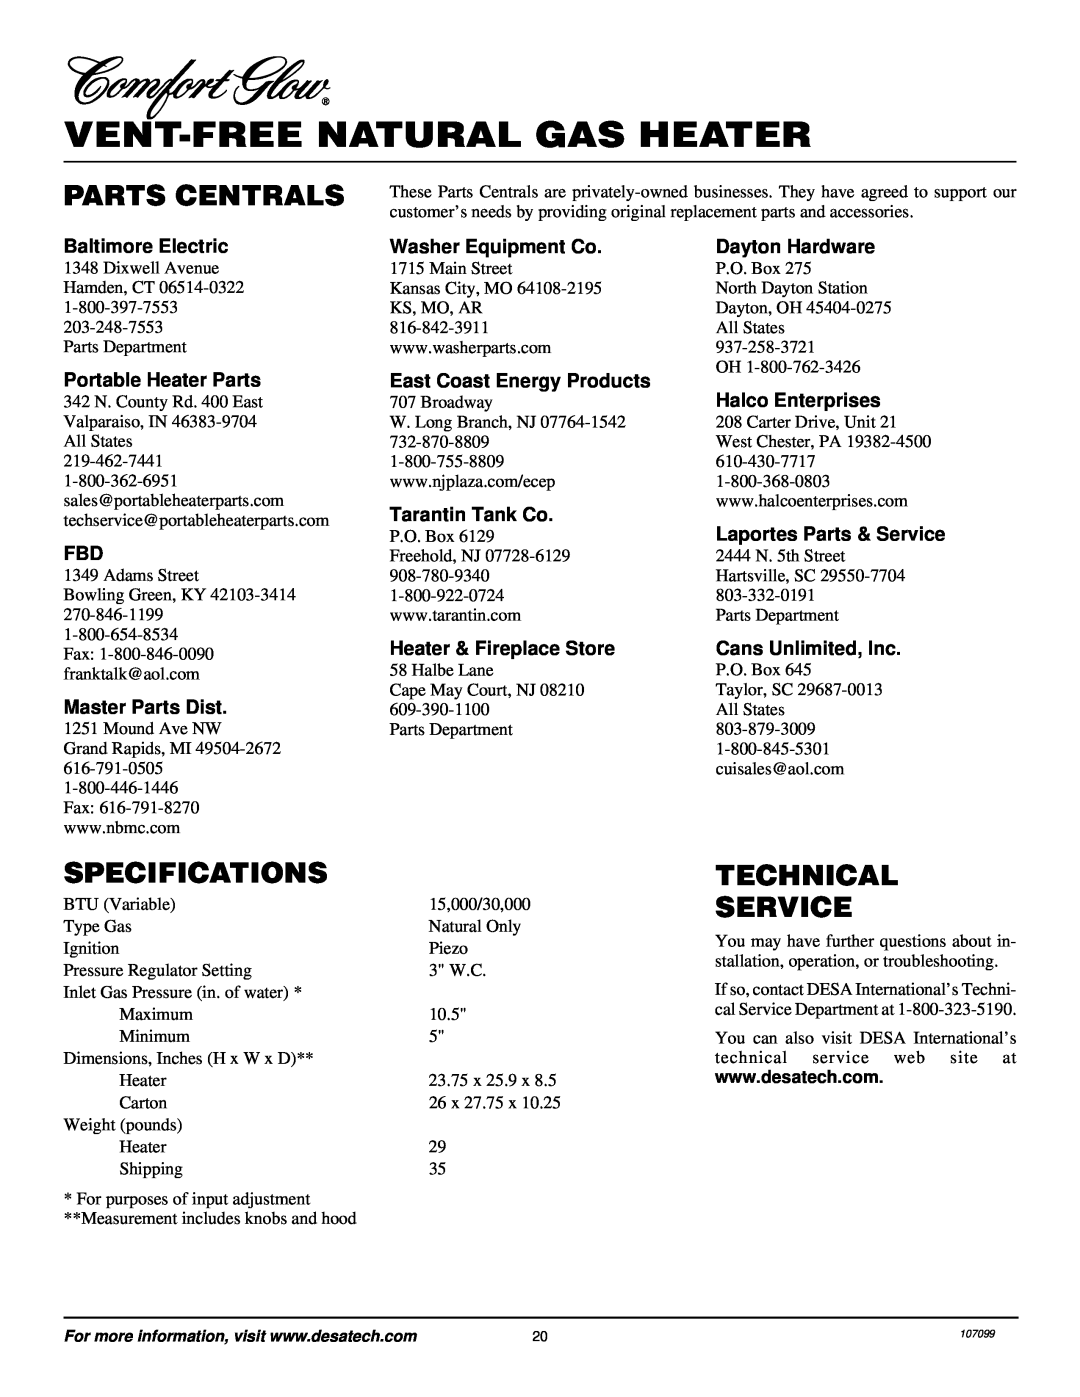 Desa RFN30TA Parts Centrals, Specifications, Technical Service, Baltimore Electric, Portable Heater Parts, Dayton Hardware 